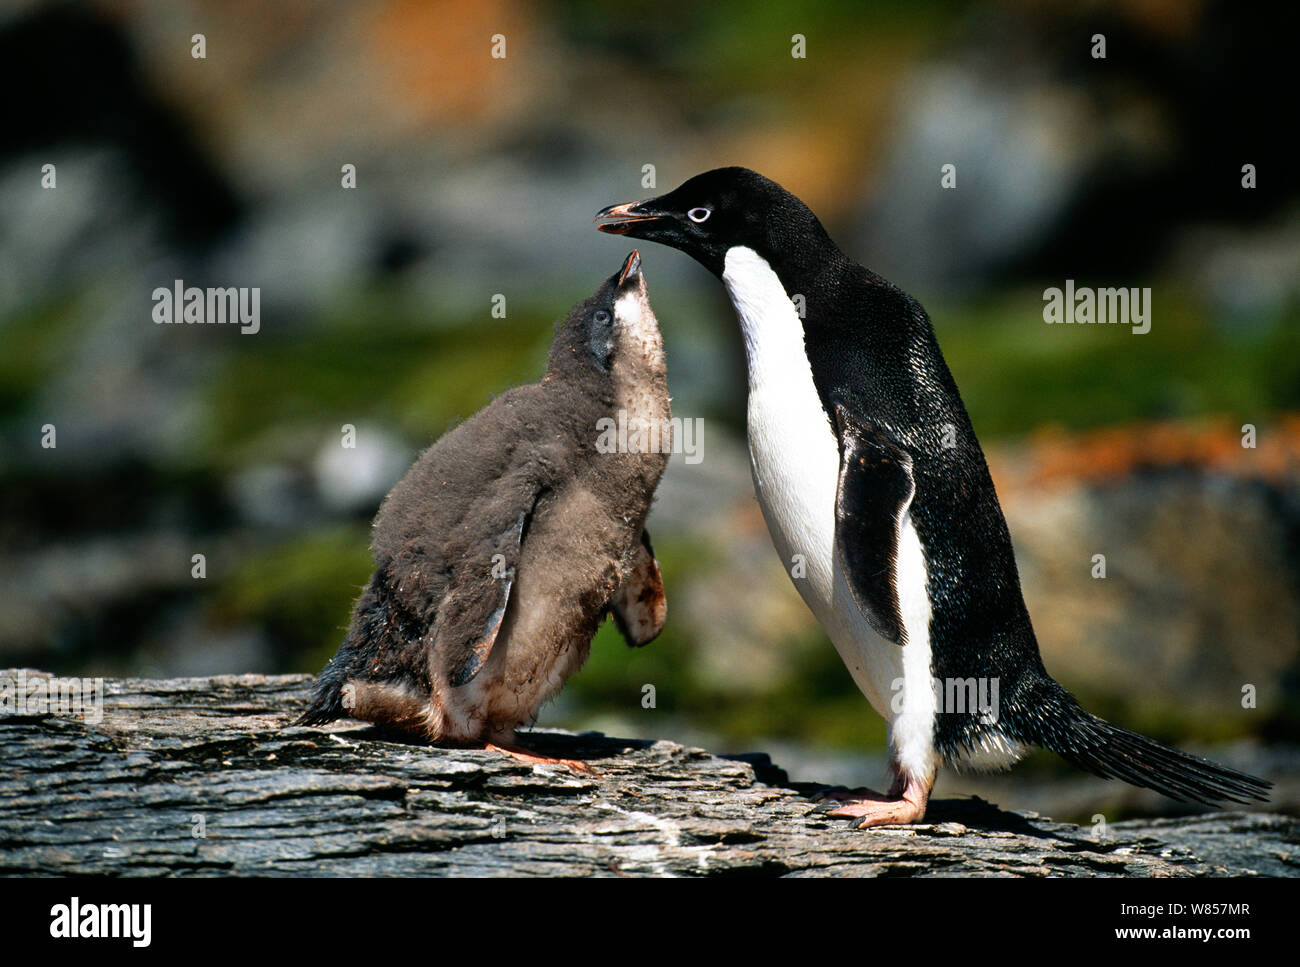 Adelie Penguin (Pygoscelis adeliae) chick begging for food from parent, Antarctic Peninsula, January Stock Photo